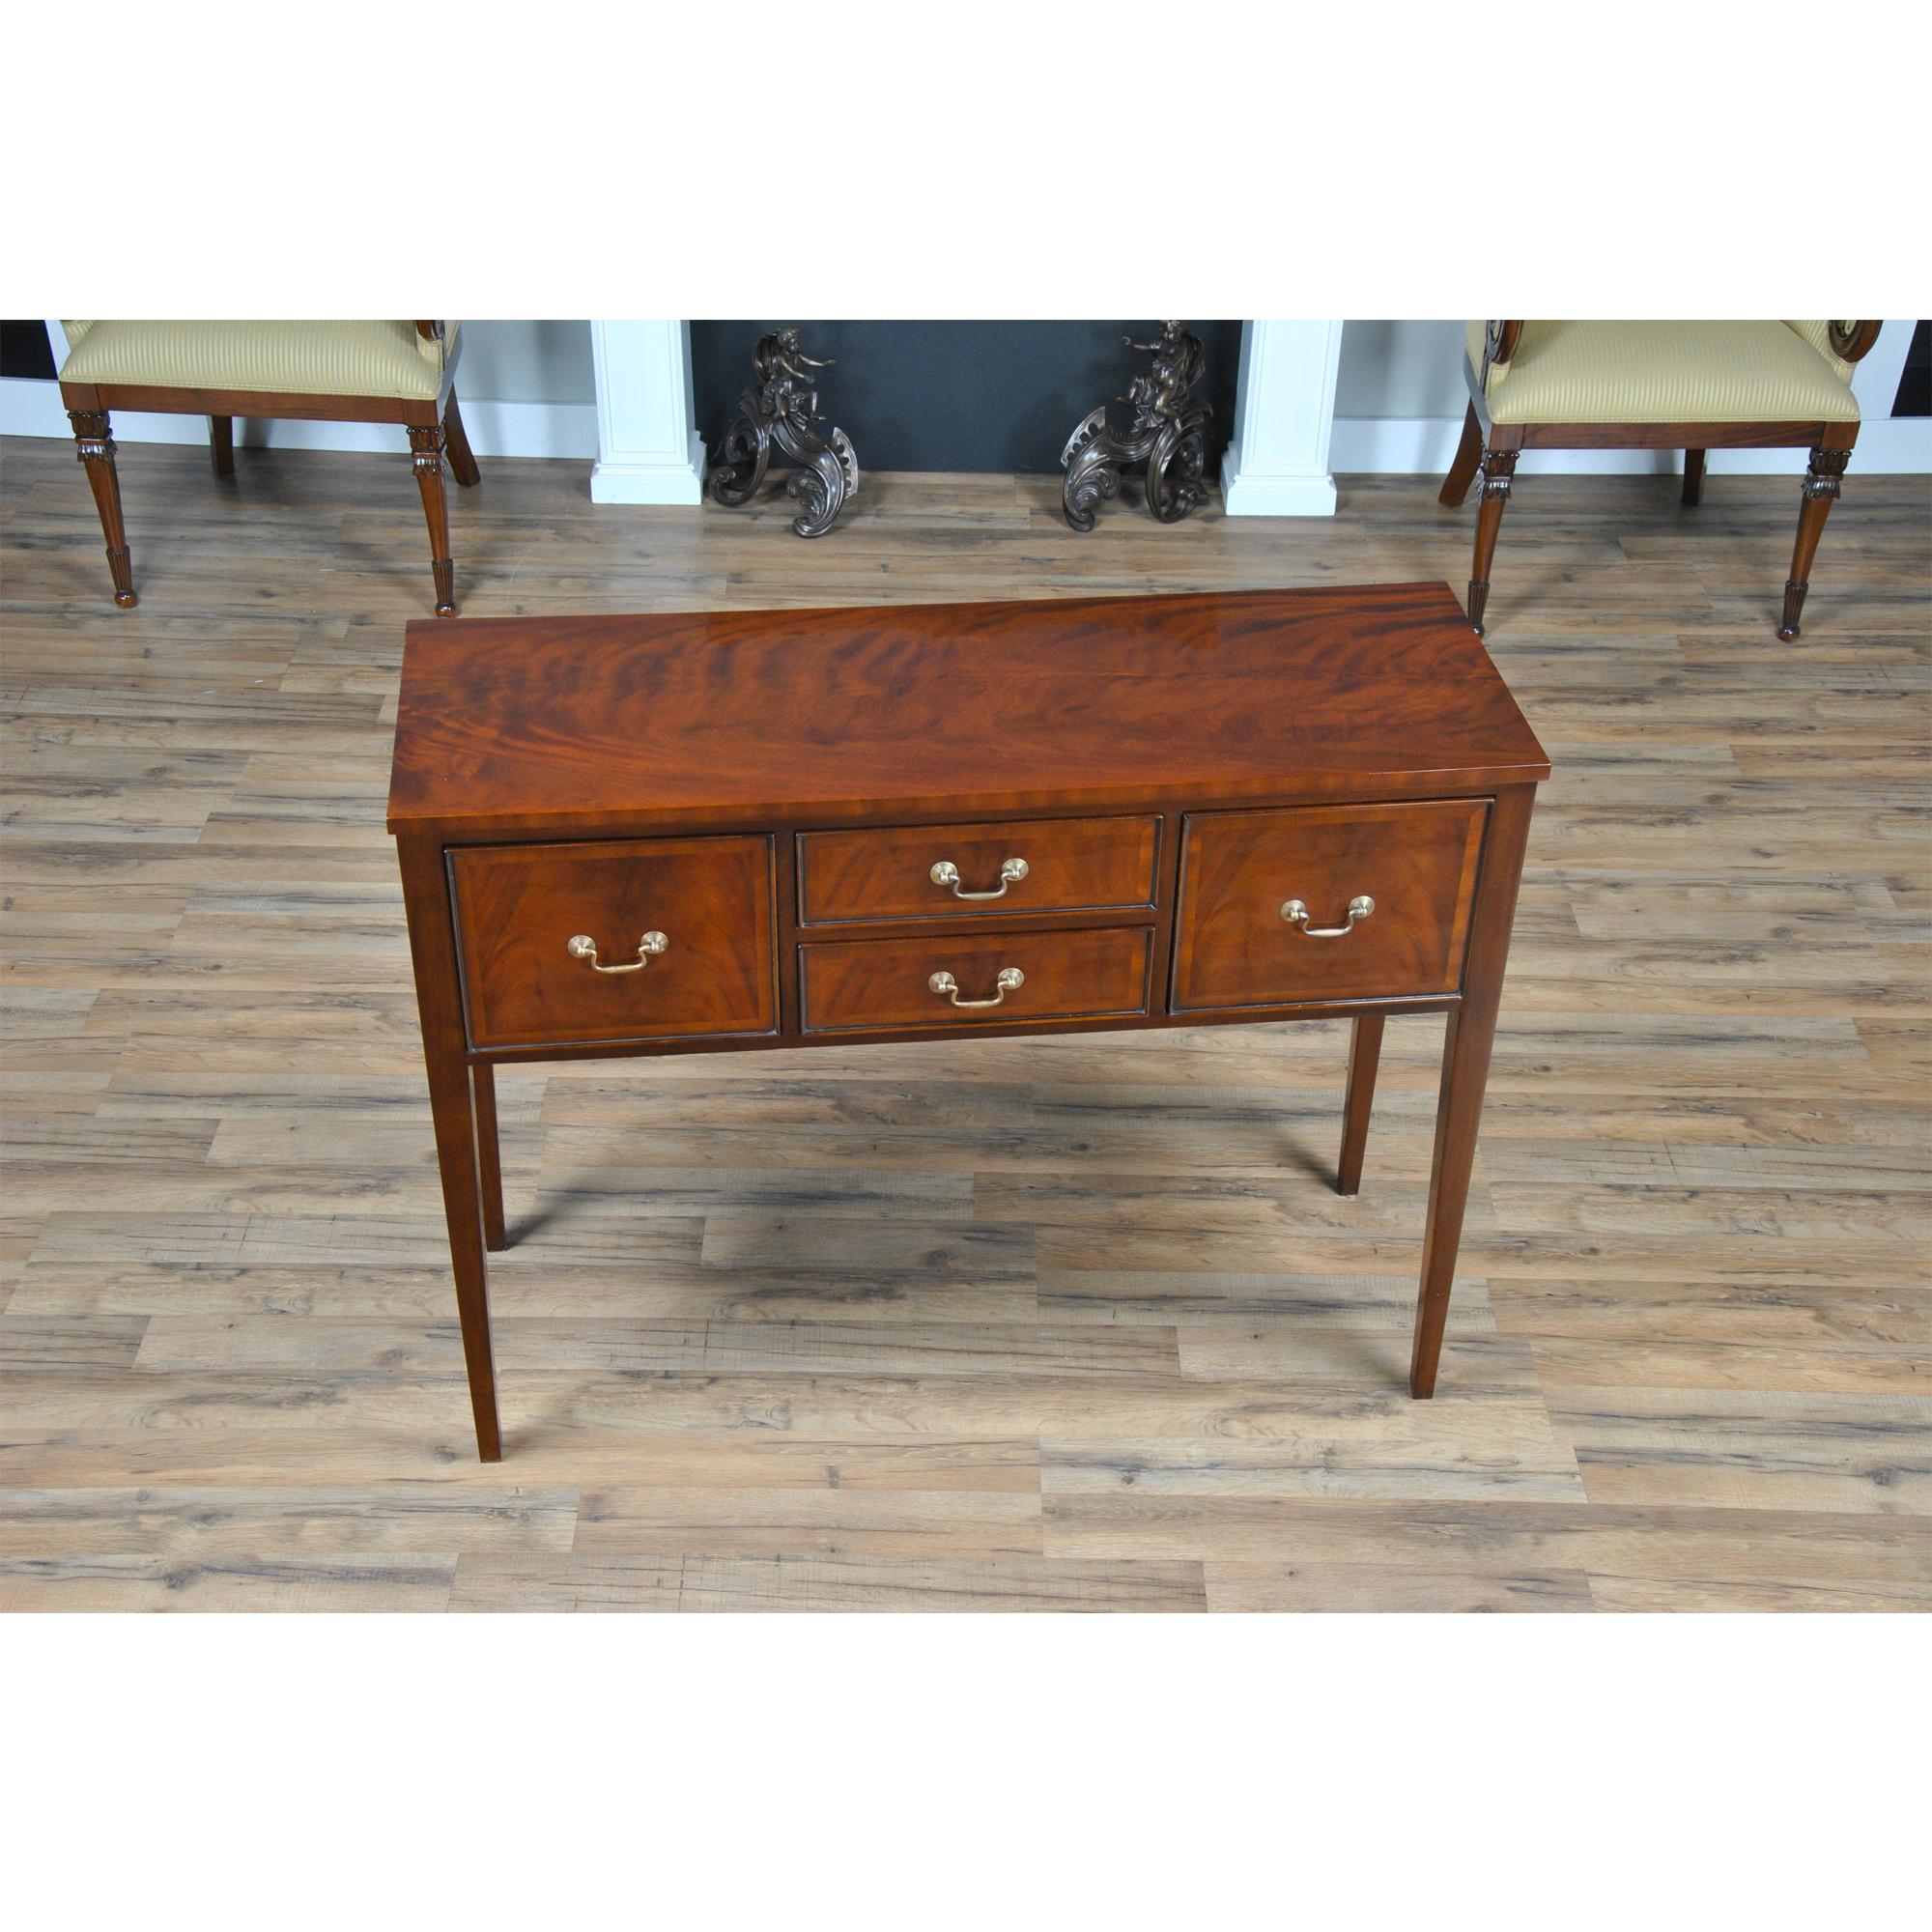 An ideal sideboard for use in smaller spaces in the dining room the Federal Mahogany Sideboard is also designed to work with almost any decor. Ideal in a dining room the piece is also suited for use in a living room or hallway. Simple lines and